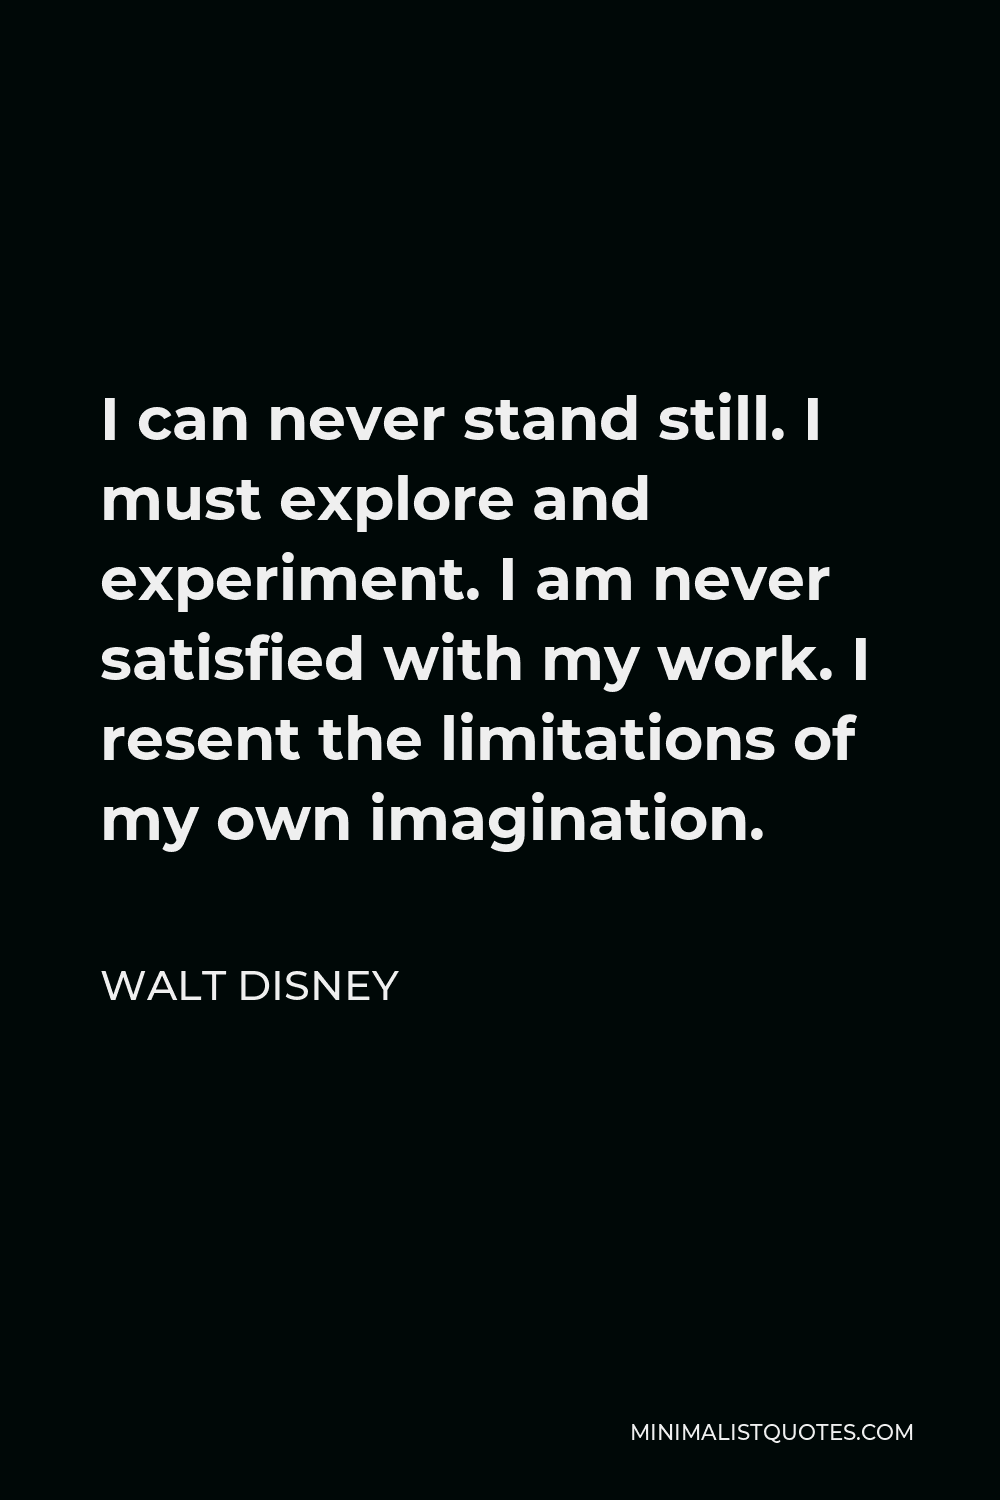 Walt Disney Quote - I can never stand still. I must explore and experiment. I am never satisfied with my work. I resent the limitations of my own imagination.